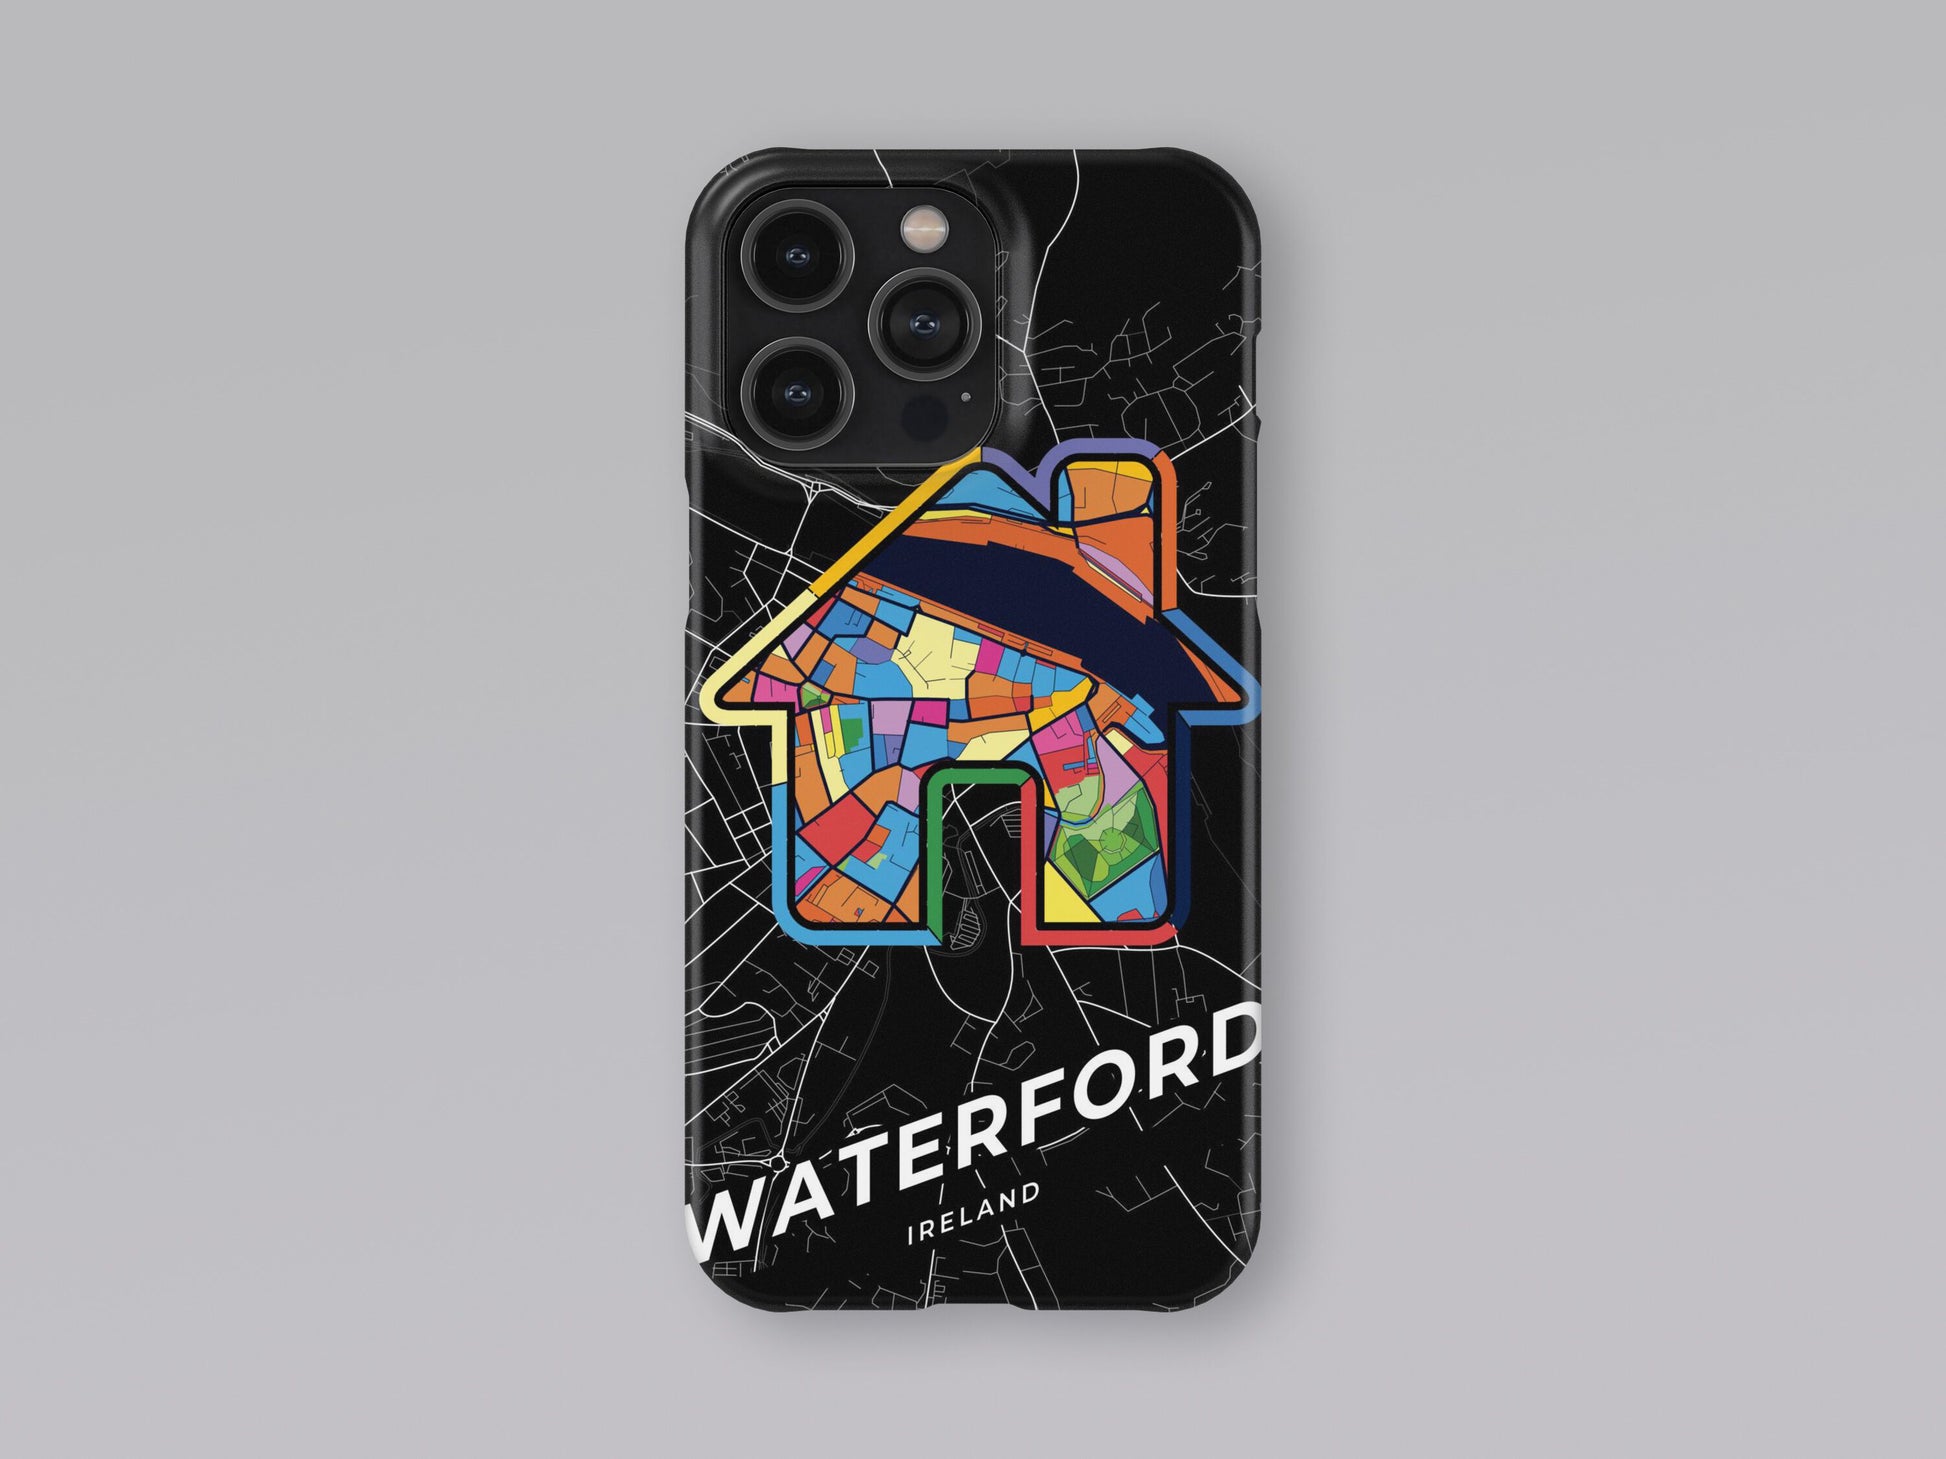 Waterford Ireland slim phone case with colorful icon 3